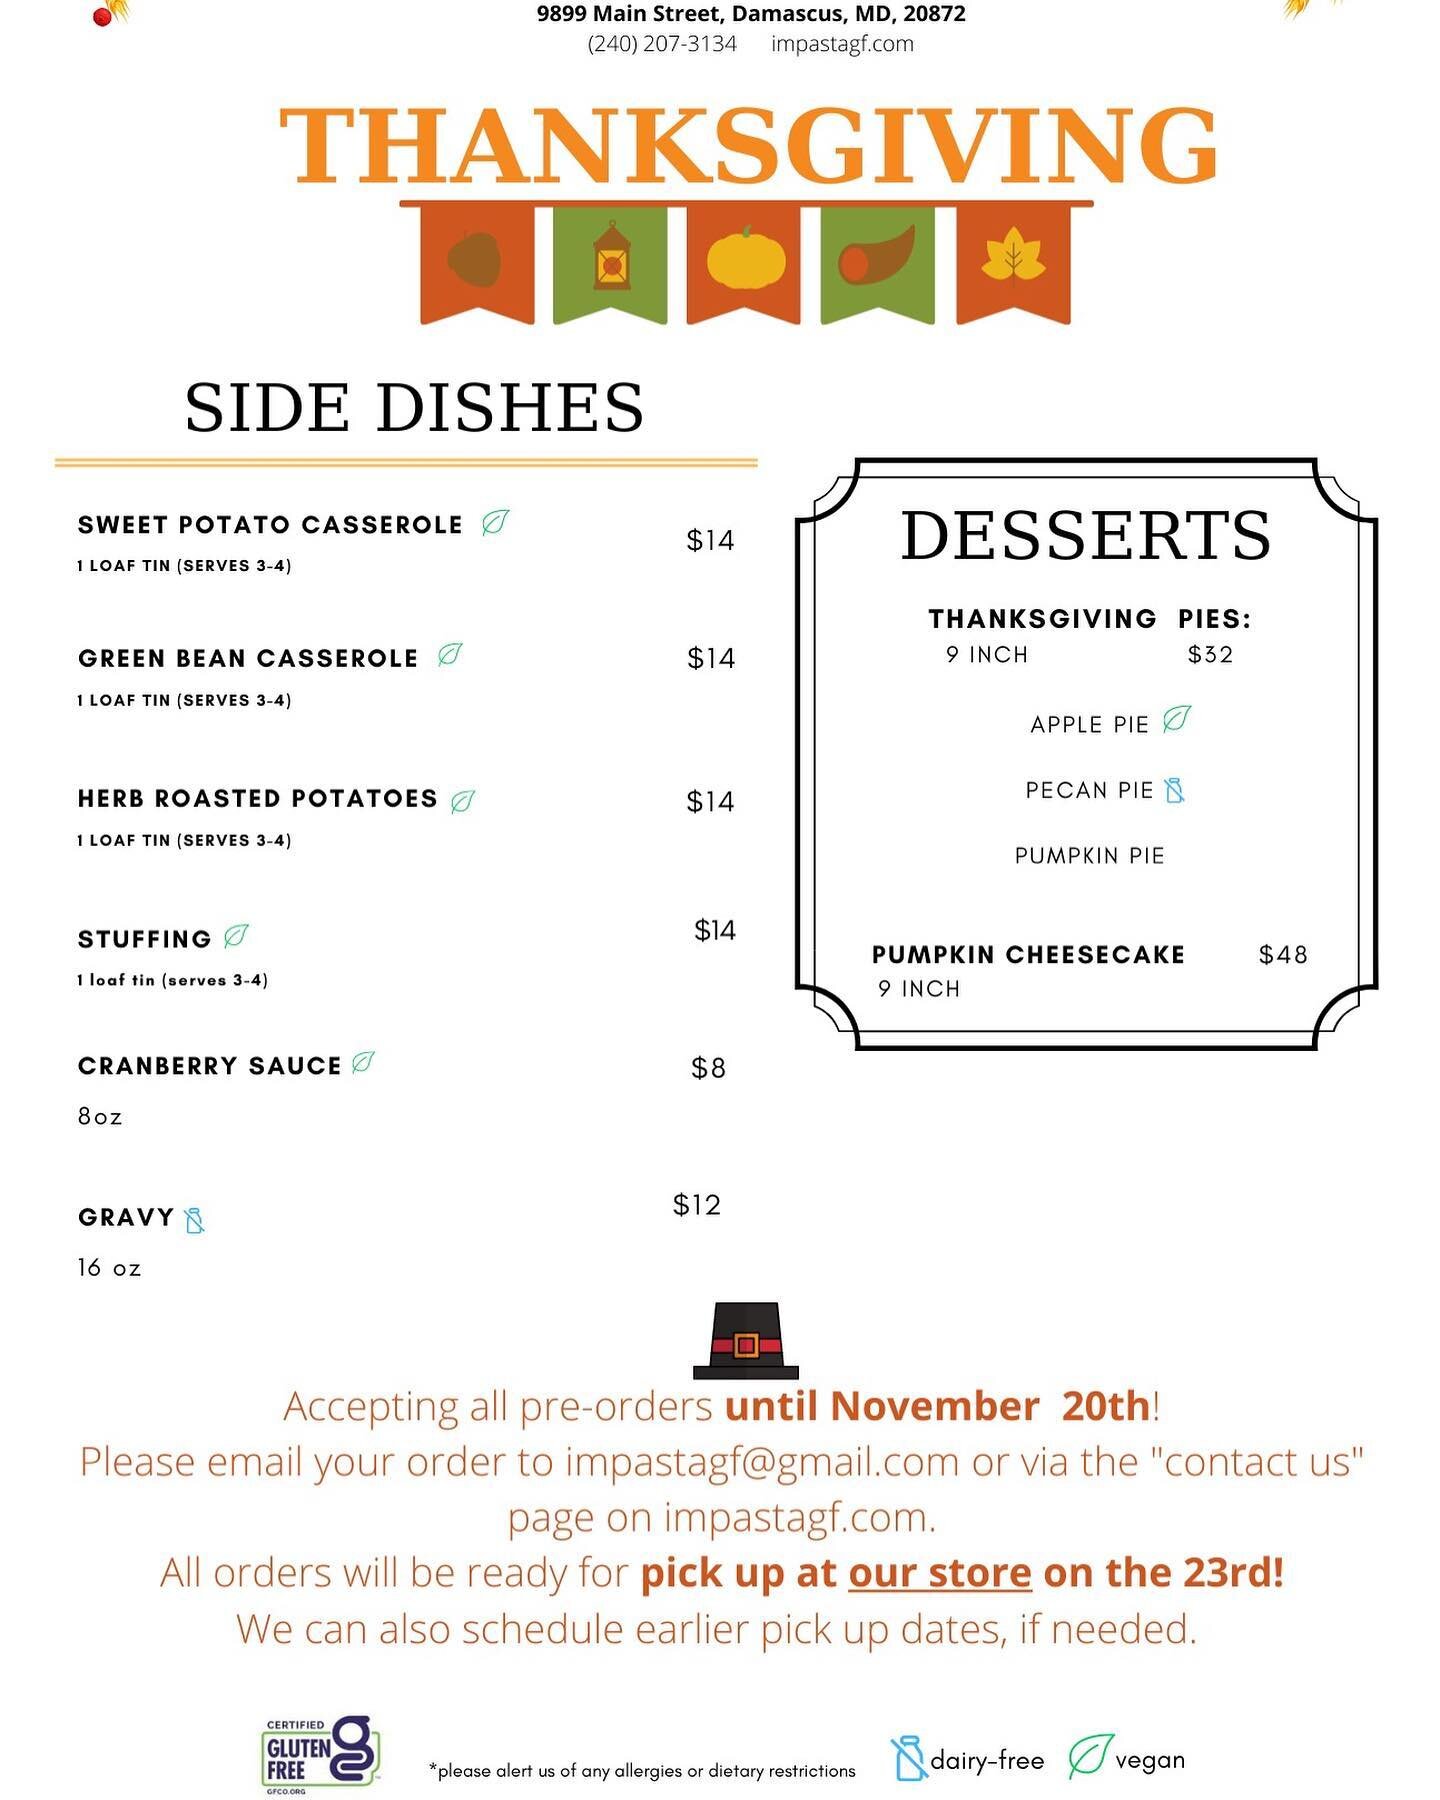 Our Thanksgiving menu is BACK!
Preorder your Thanksgiving sides and desserts with us~ 
🍁 🦃 🌽 🍂 

#glutenfree #dairyfree #nutfree #eggfree #veganoptions #delicious